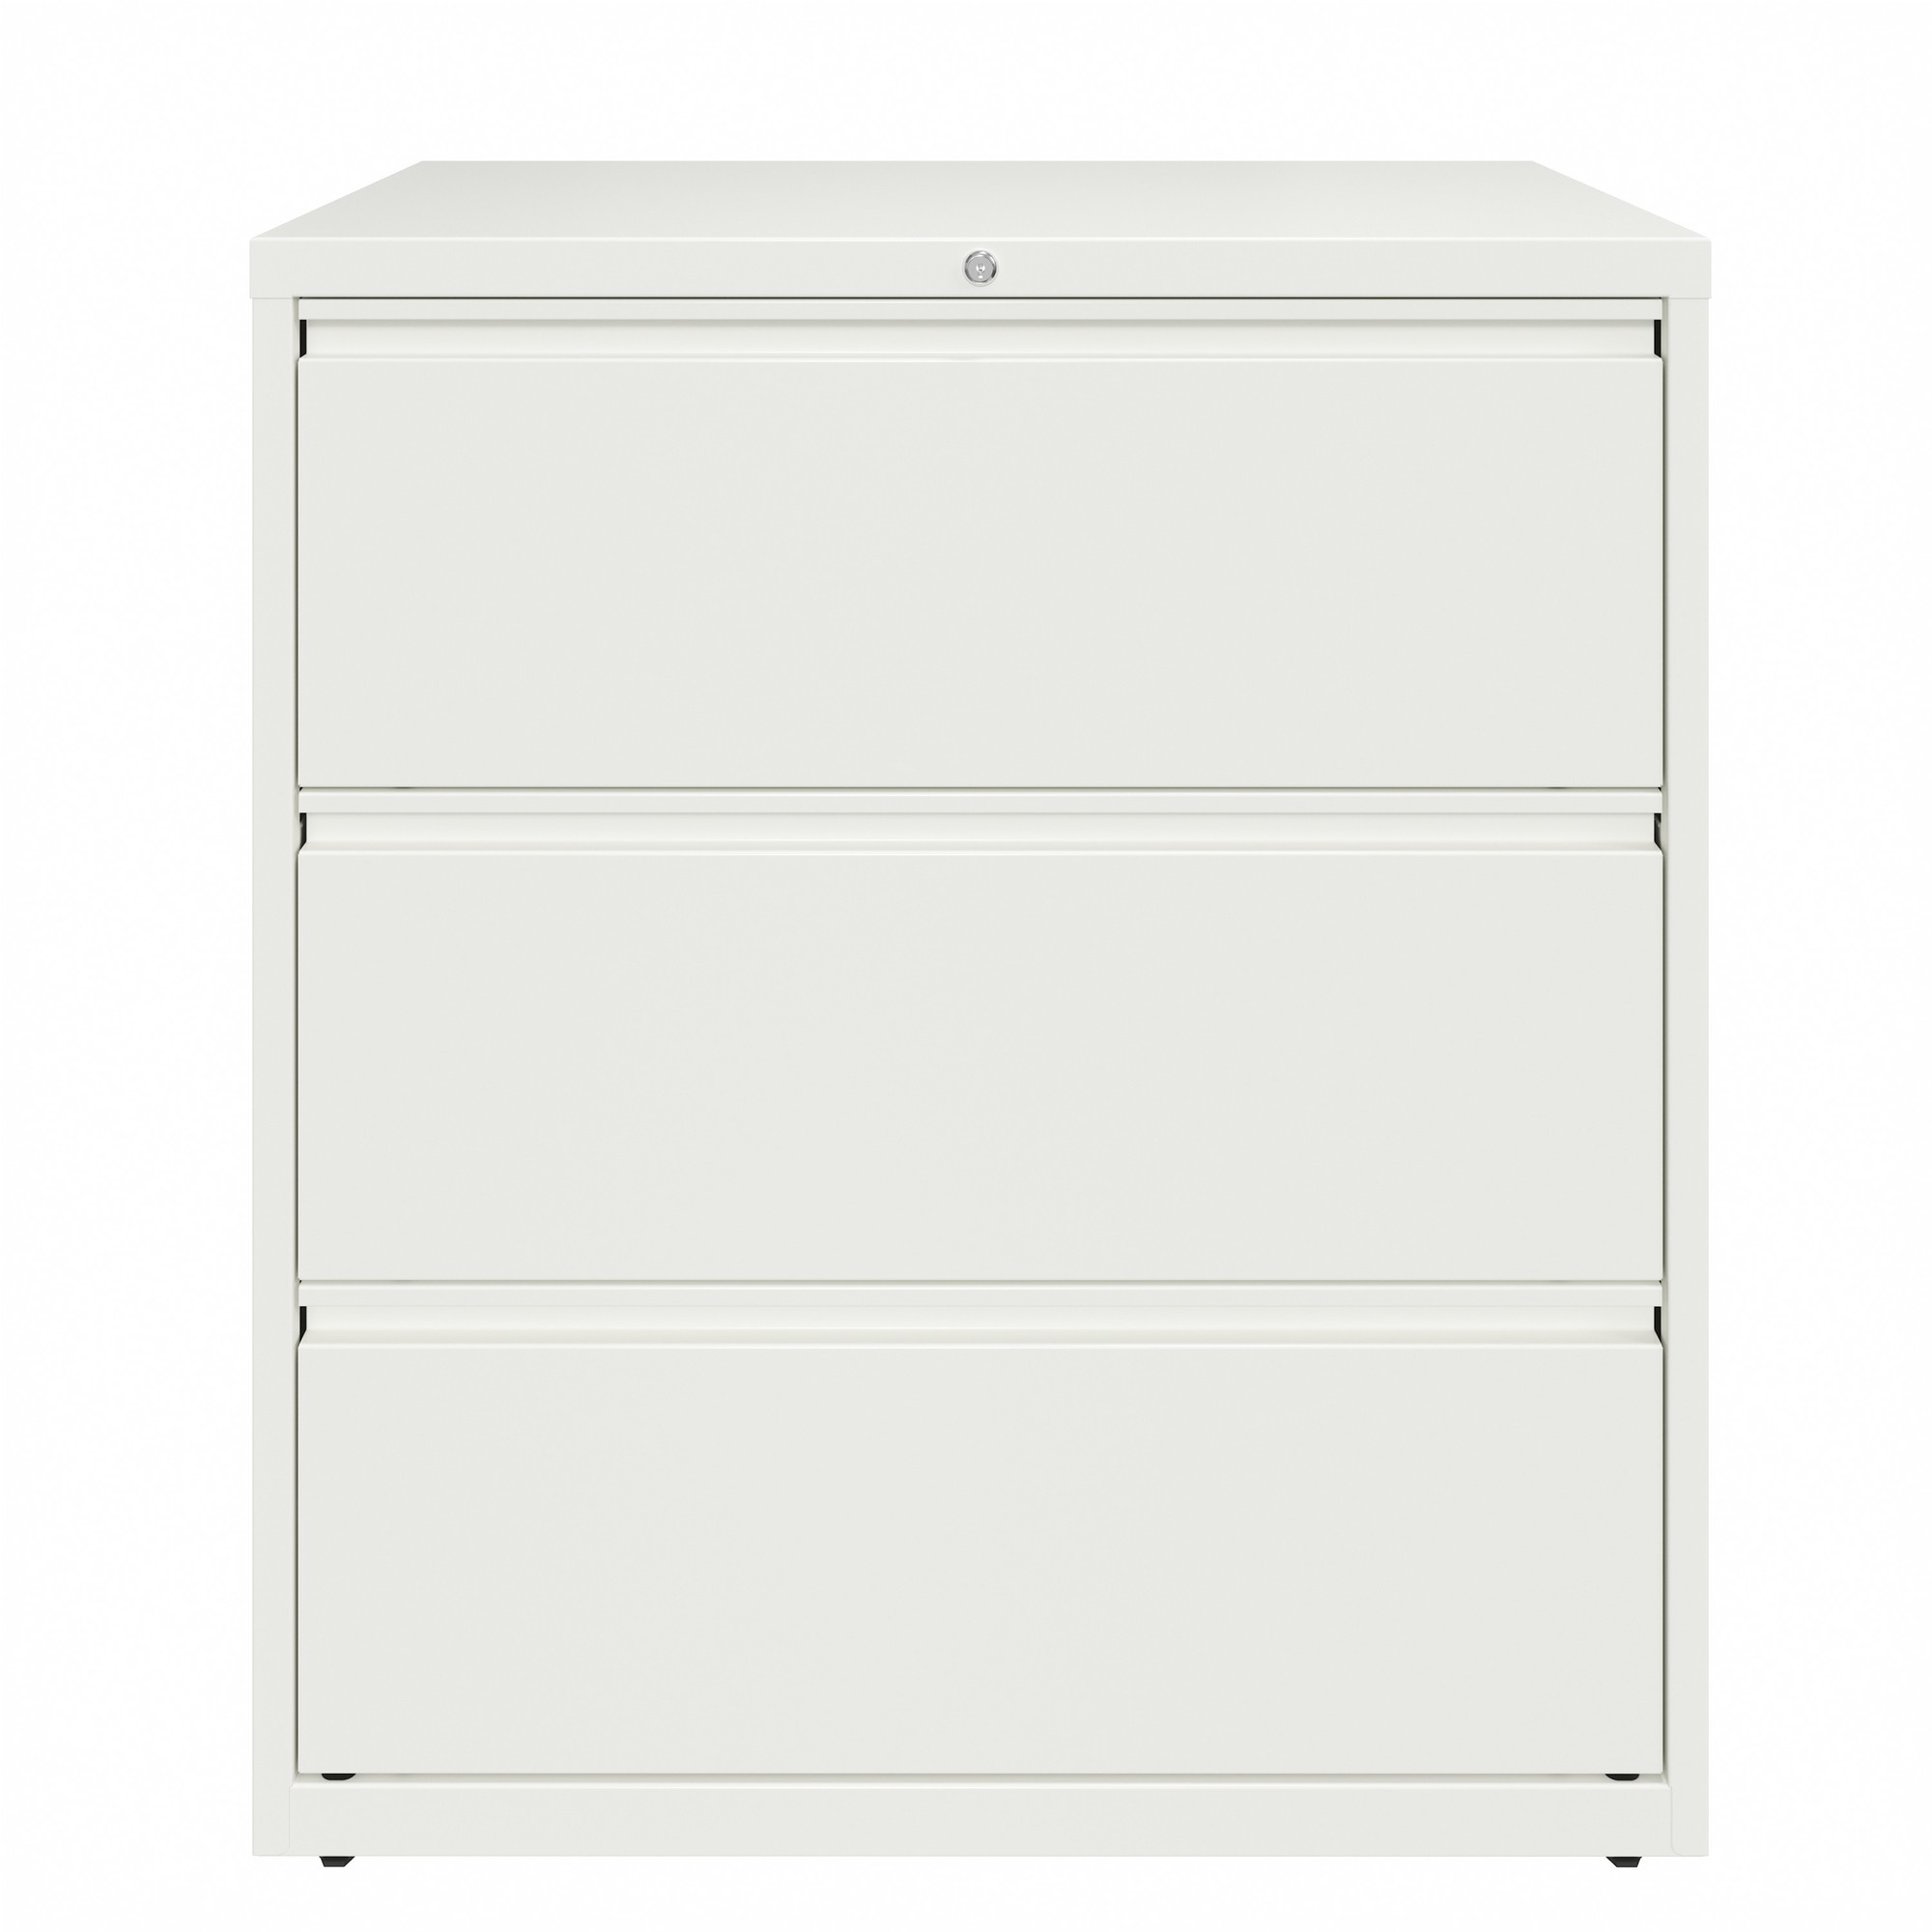 3 Drawer Lateral File Cabinet, Width 36 in, Depth 18.625 in, Height 40.25 in, Model - Hirsh Industries 23701